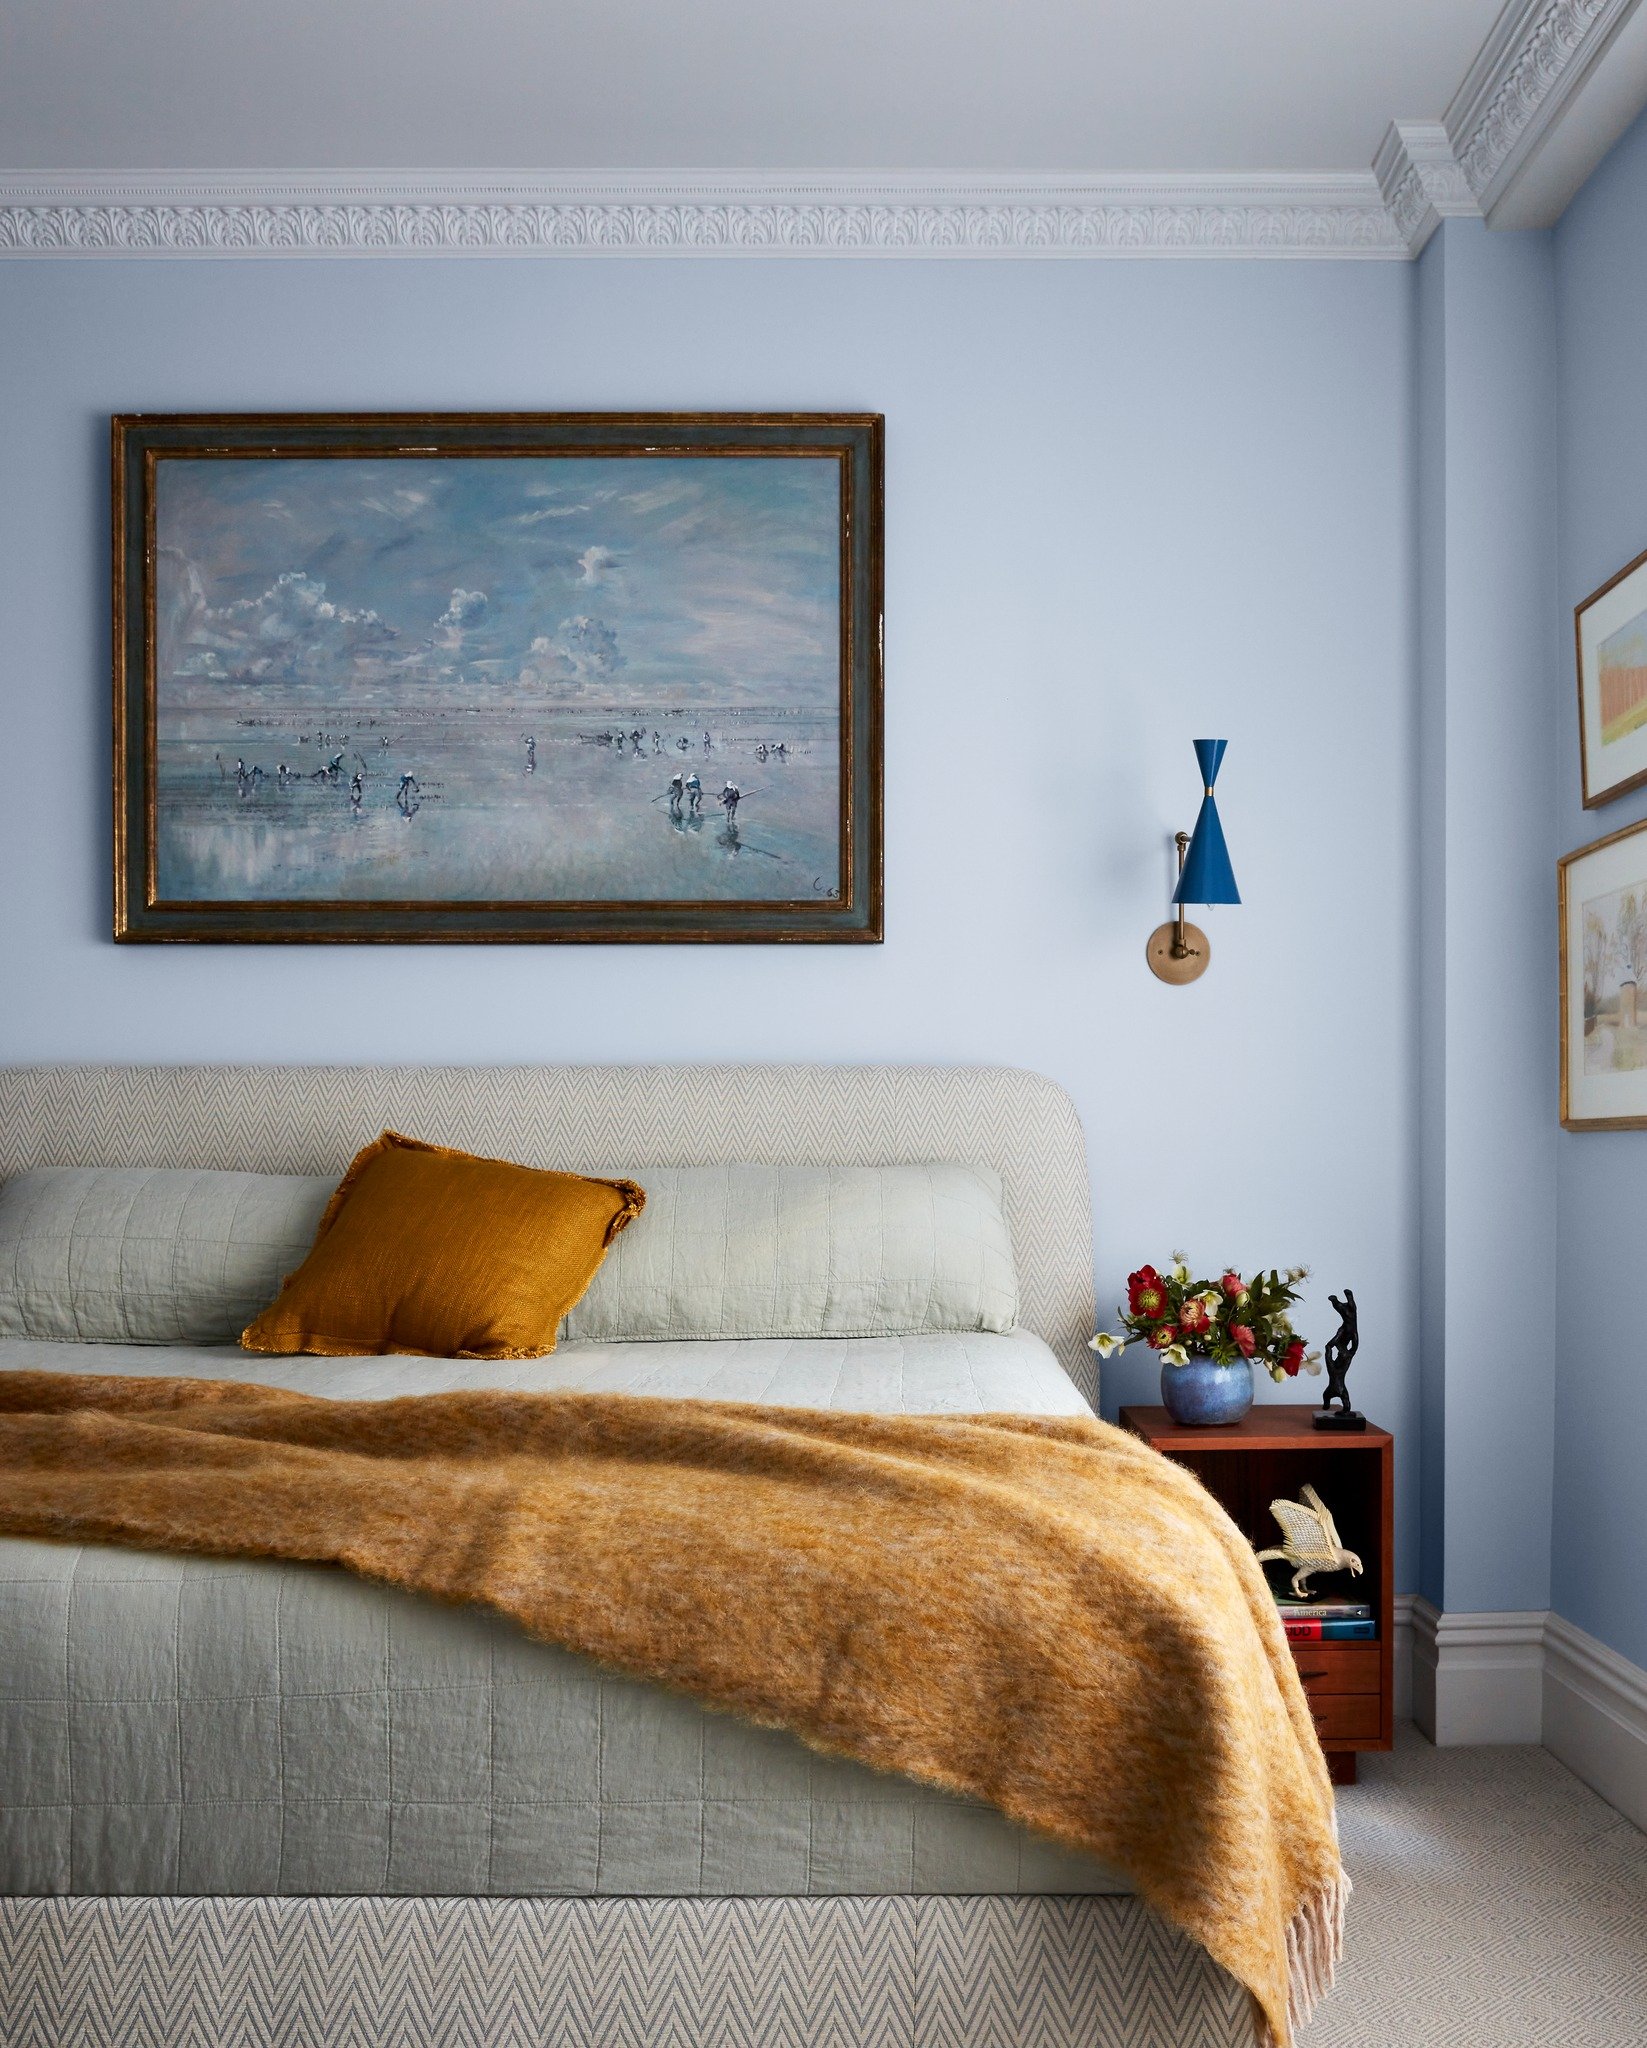 Now this is a bedroom I would enjoy coming home to and waking up in! The goal for the primary bedroom at our #UES prewar project was to provide a calm respite in a busy city. Inspired by the Leonid Berman hanging over the bed, we incorporated cool sh